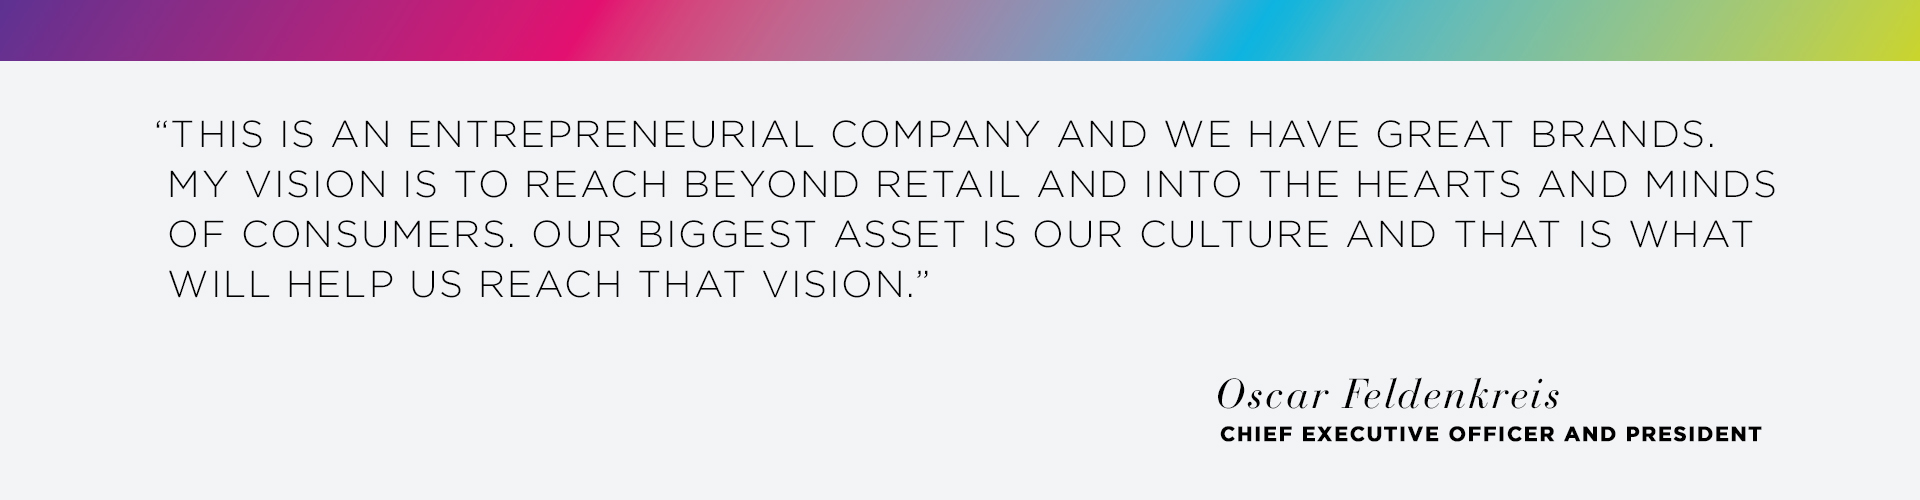 This is an entrepreneurial company and we have great brands. My Vision is to reach beyond retail and into the hearts and minds of consumers. Our biggest asset is our culture and that is what will help us reach that vision. - Oscar Feldenkreis